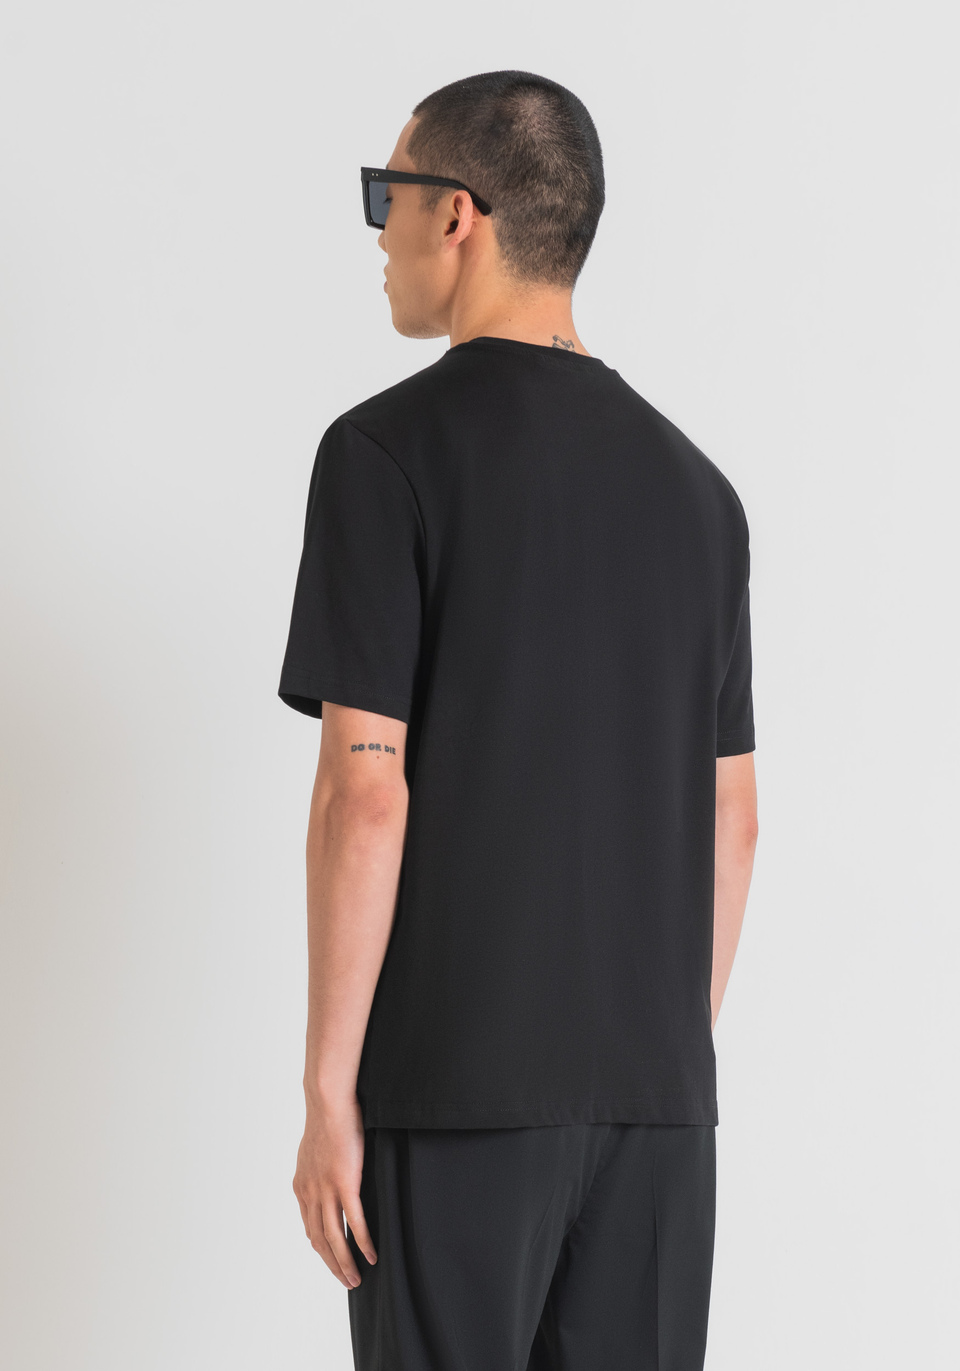 RELAXED FIT T-SHIRT IN COTTON JERSEY WITH POCKET AND LOGO PLAQUE - Antony Morato Online Shop